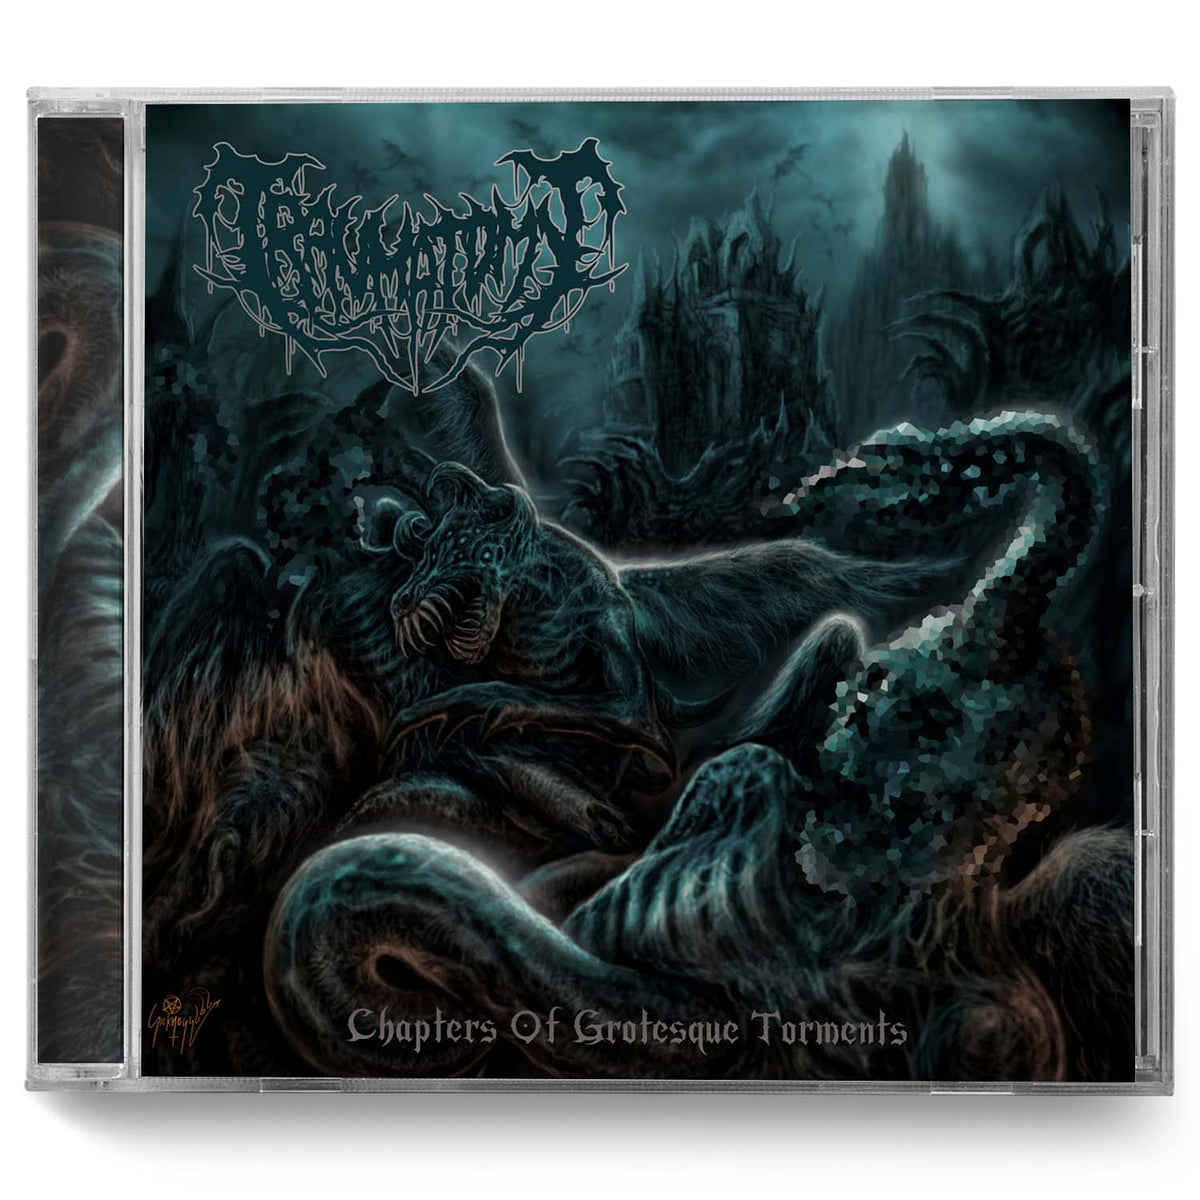 Traumatomy "Chapters of Grotesque Torments" CD - Miasma Records